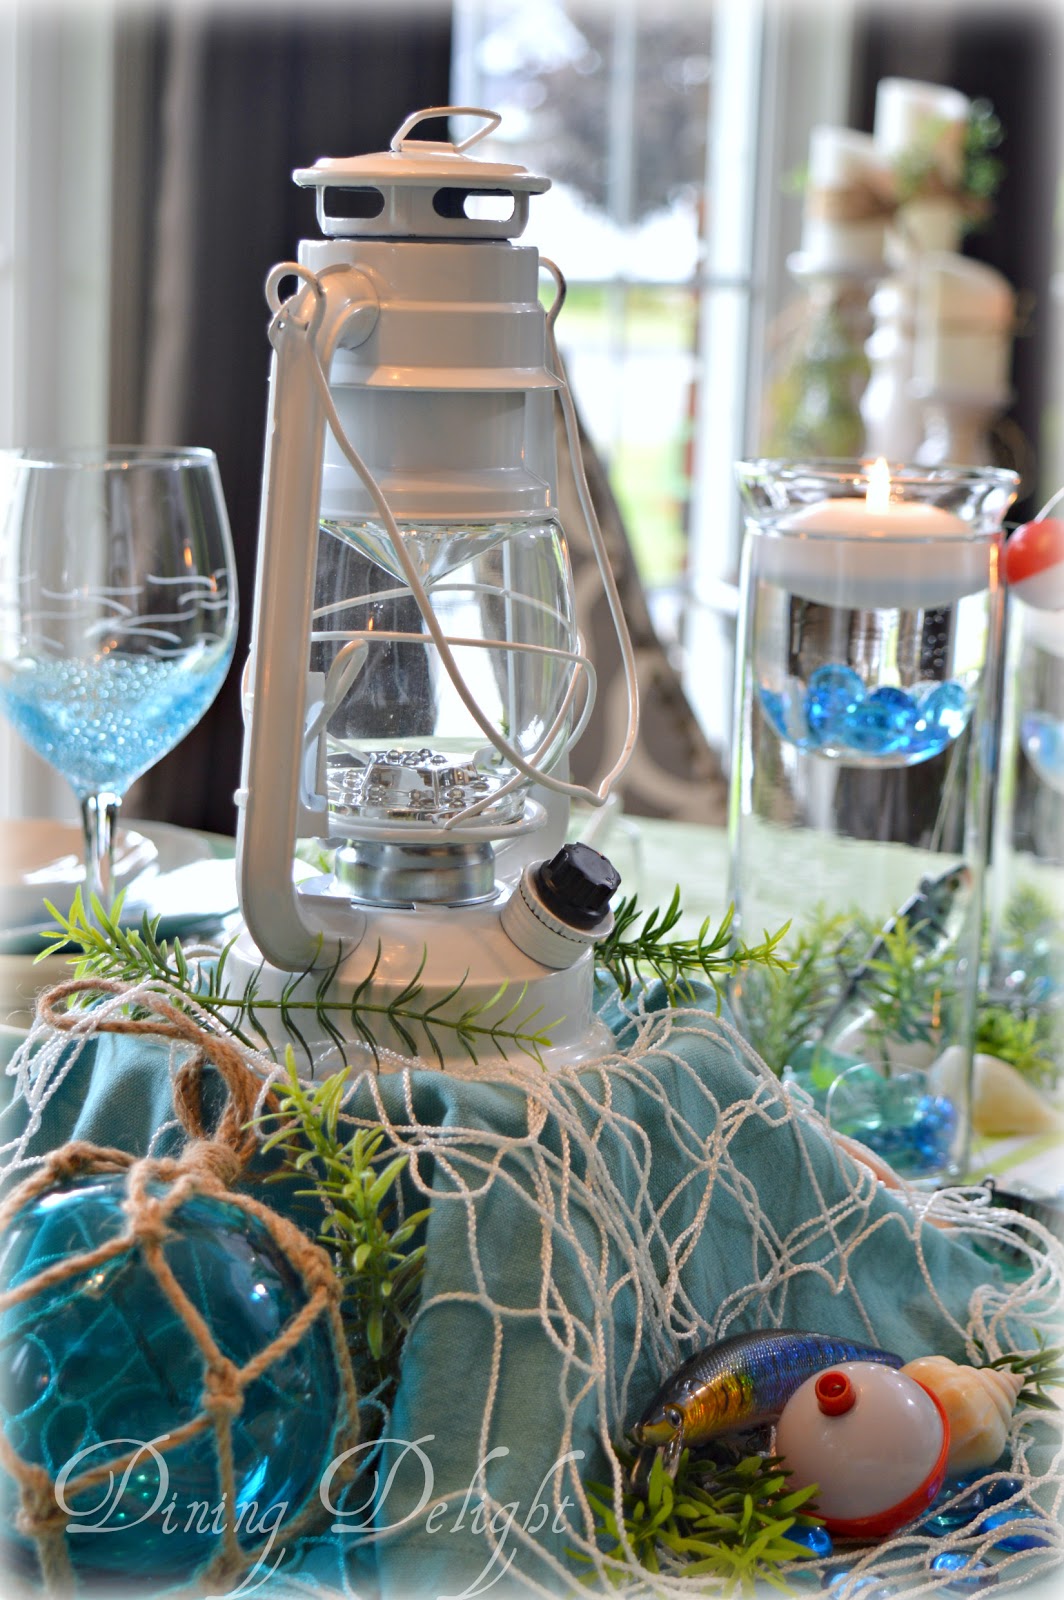 Dining Delight: Fishing Tablescape for Father's Day